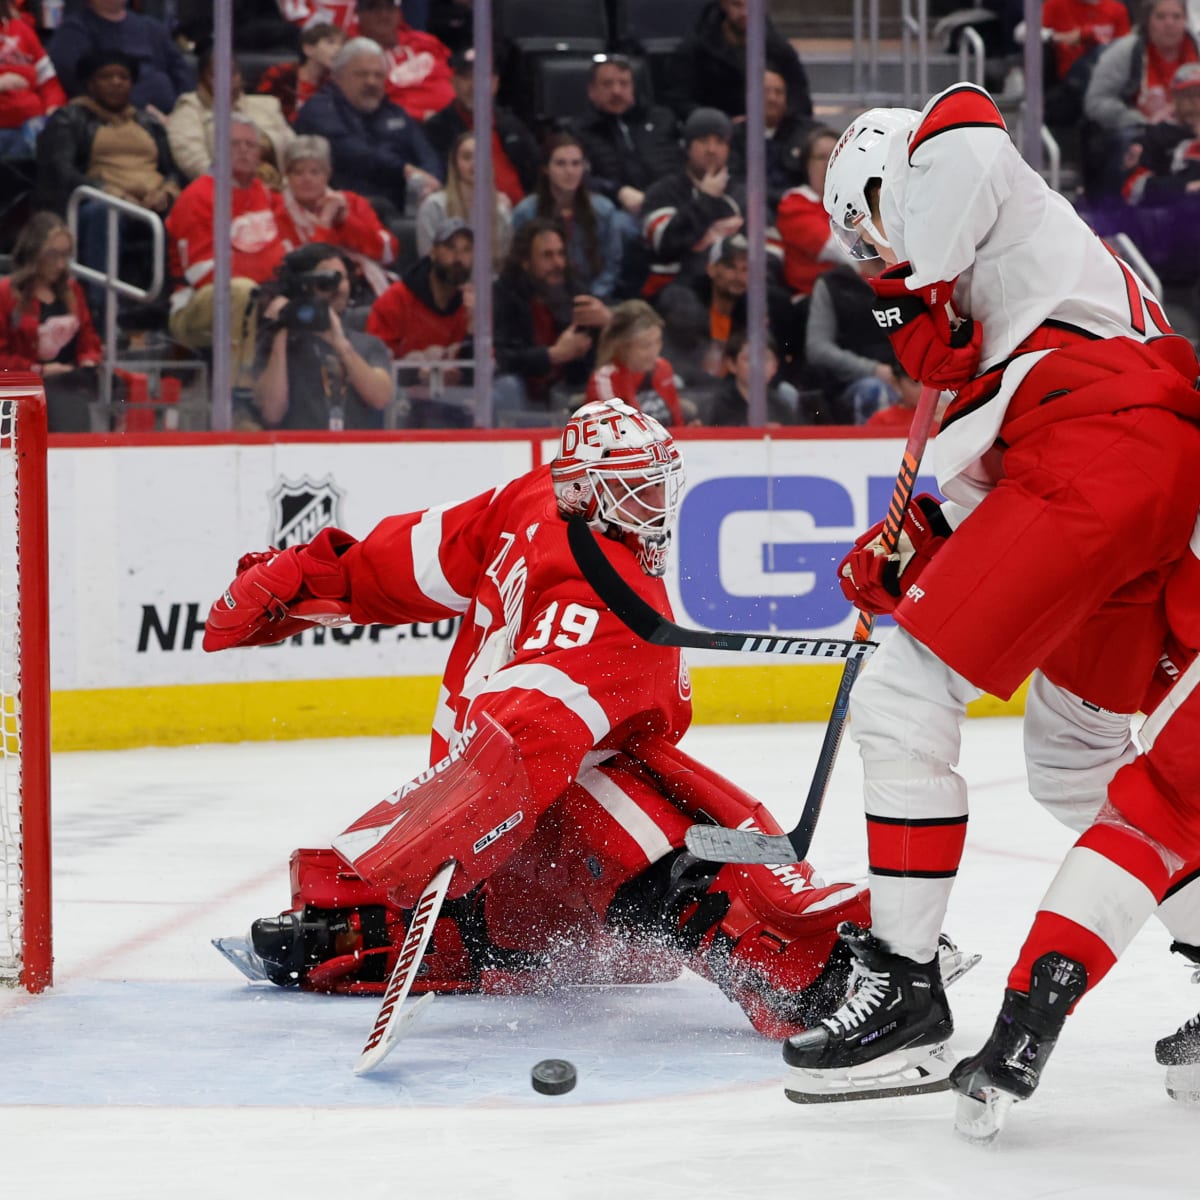 Detroit Red Wings goalie Ville Husso ready for duo with Nedeljkovic